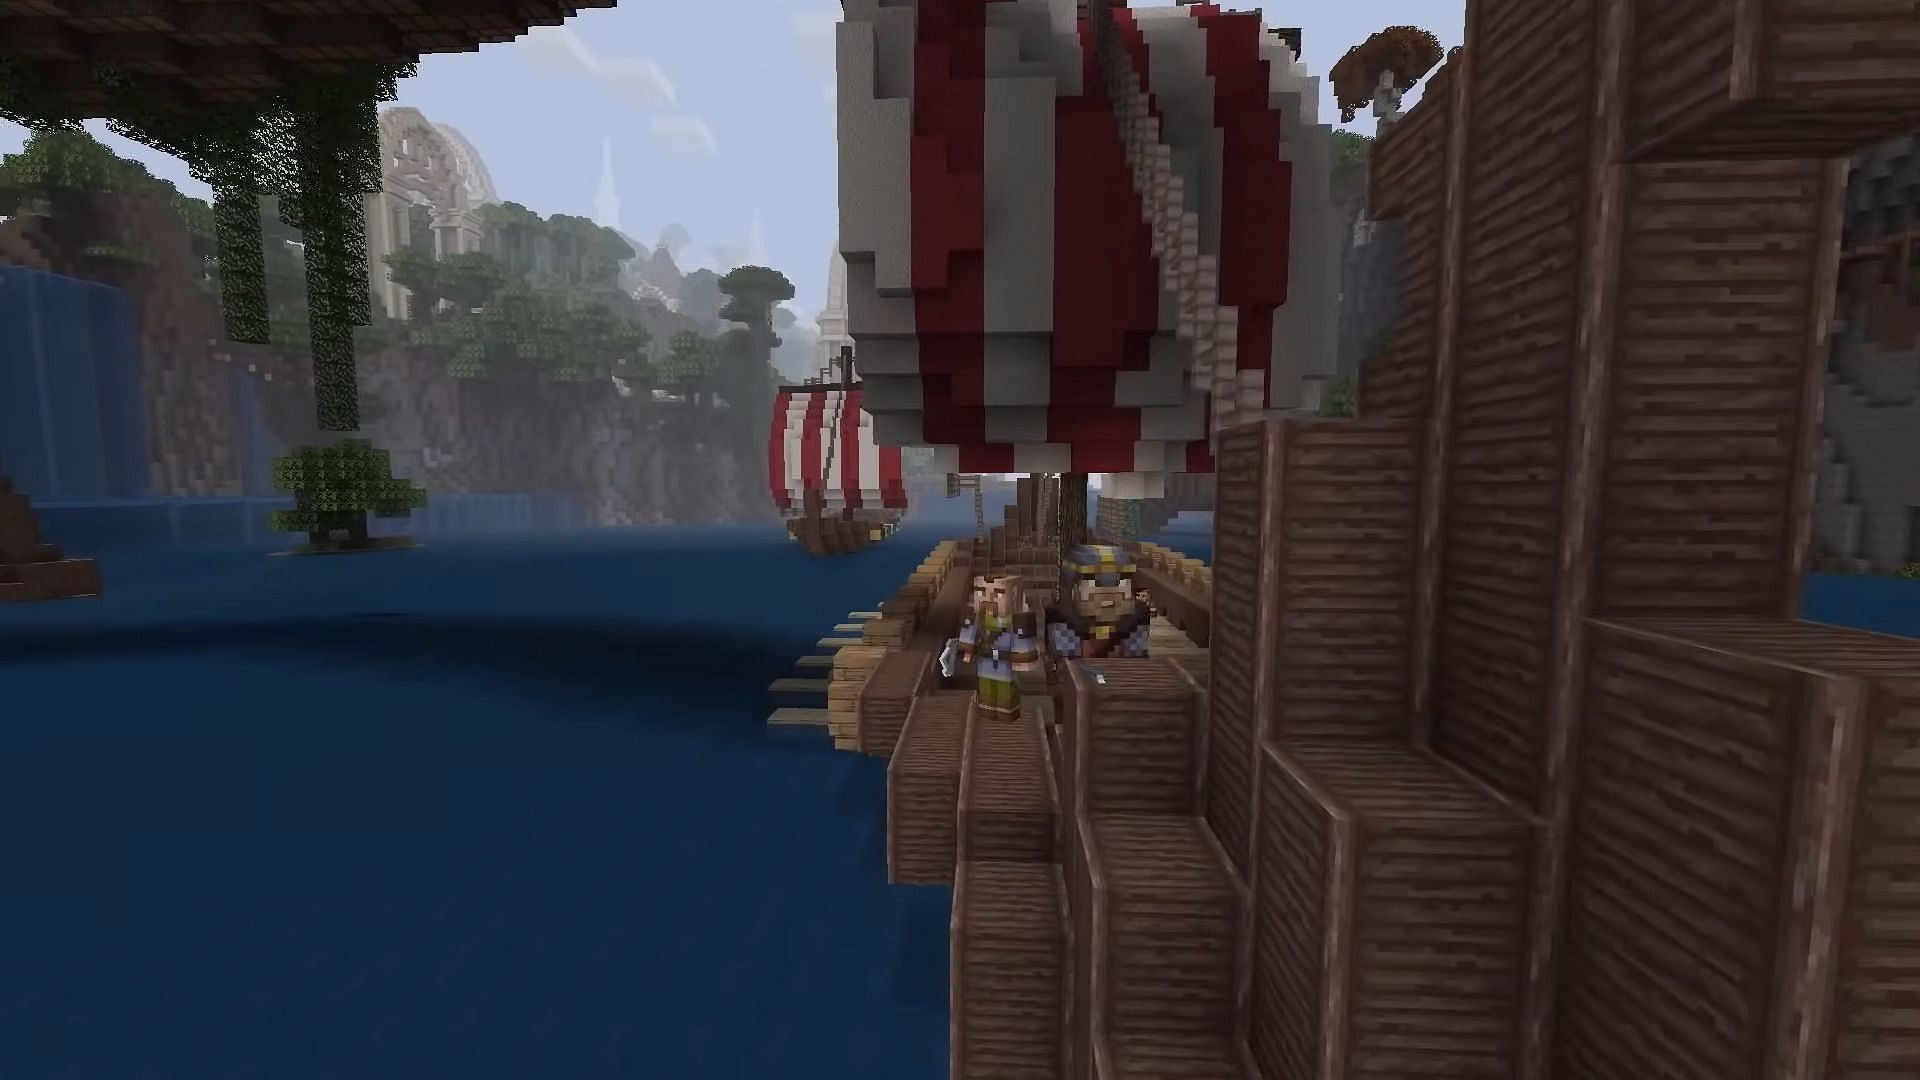 Explore a world of warriors, longships, and the afterlife in this Minecraft DLC (Image via Mojang)